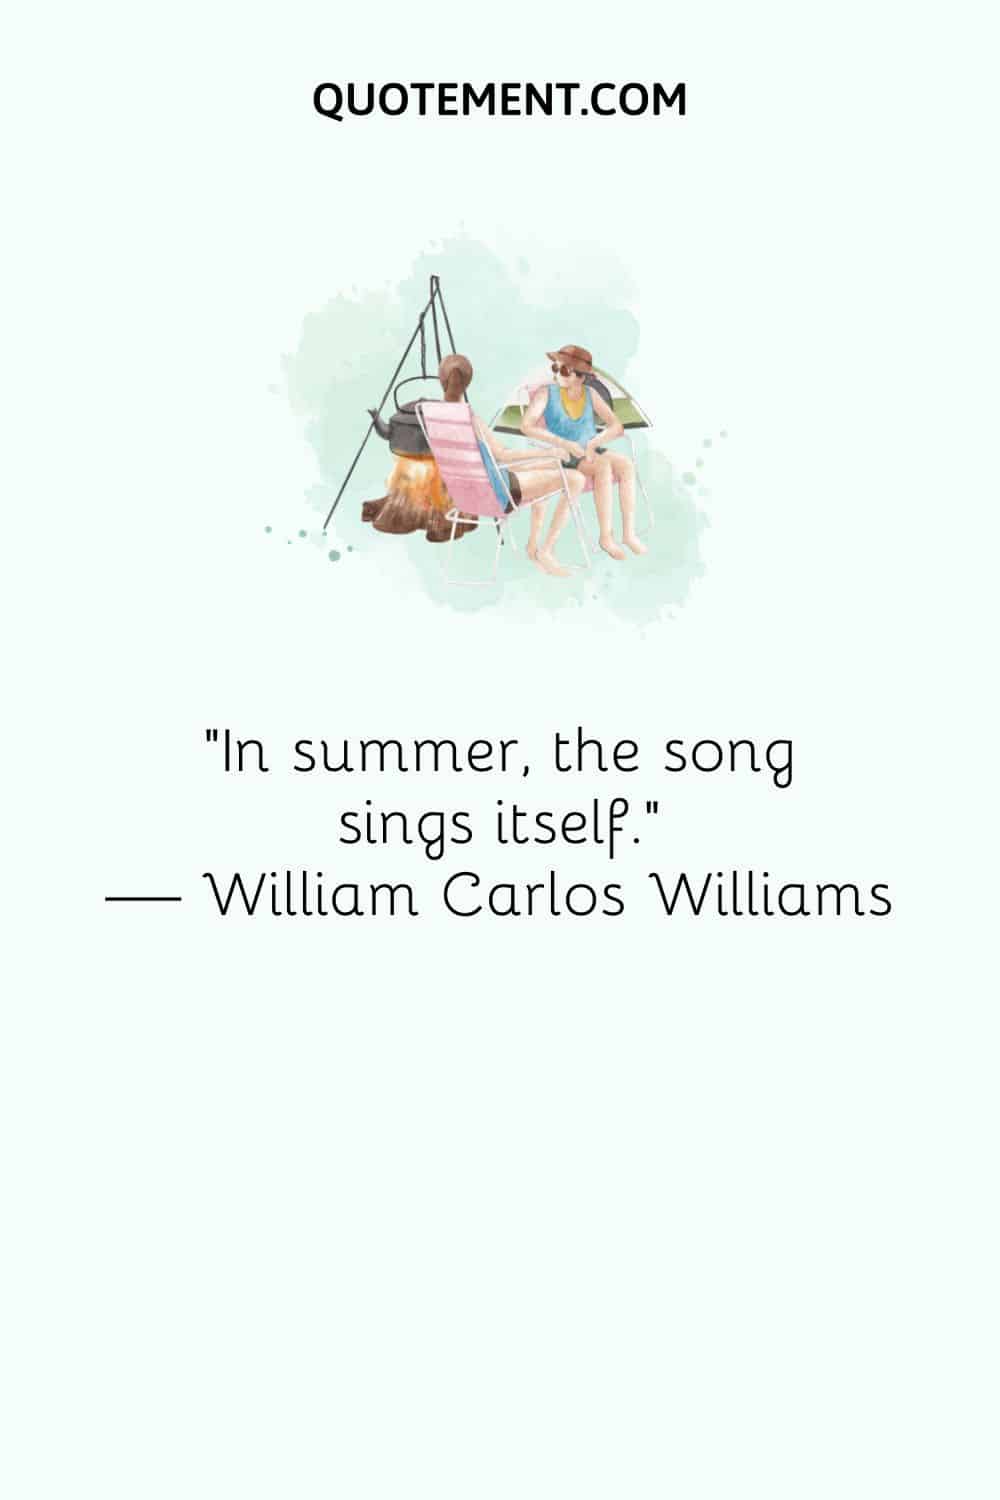 “In summer, the song sings itself.” — William Carlos Williams